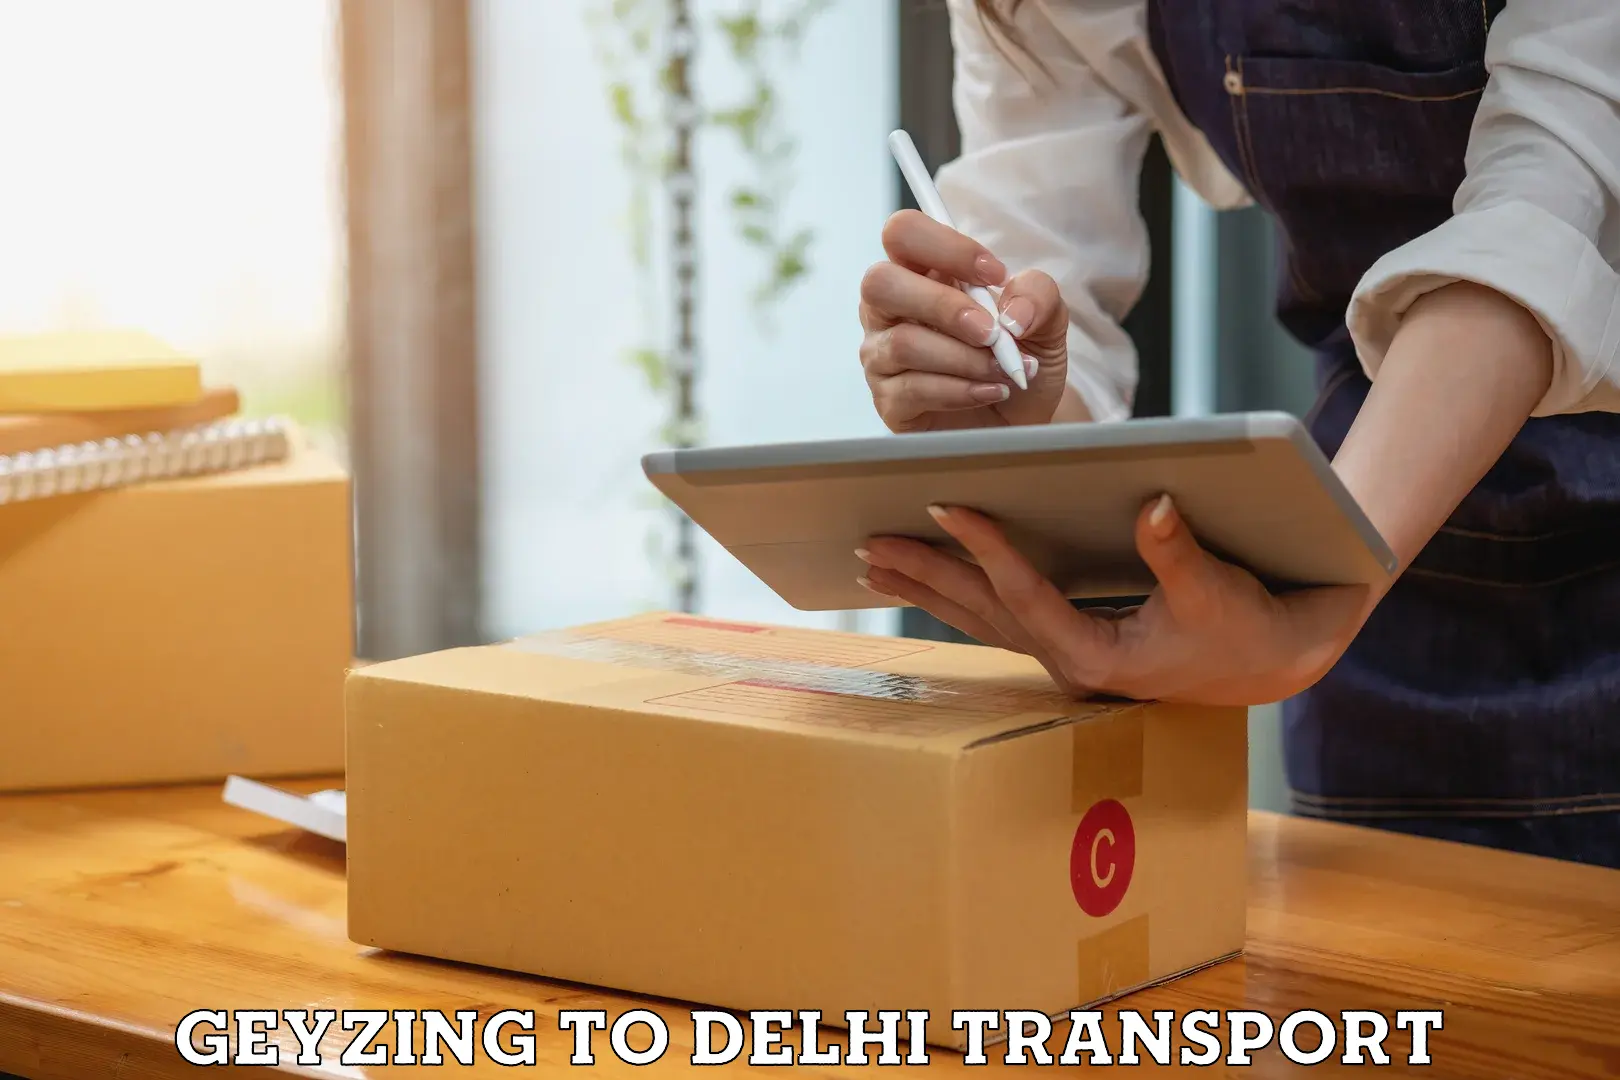 Domestic goods transportation services Geyzing to Indraprastha